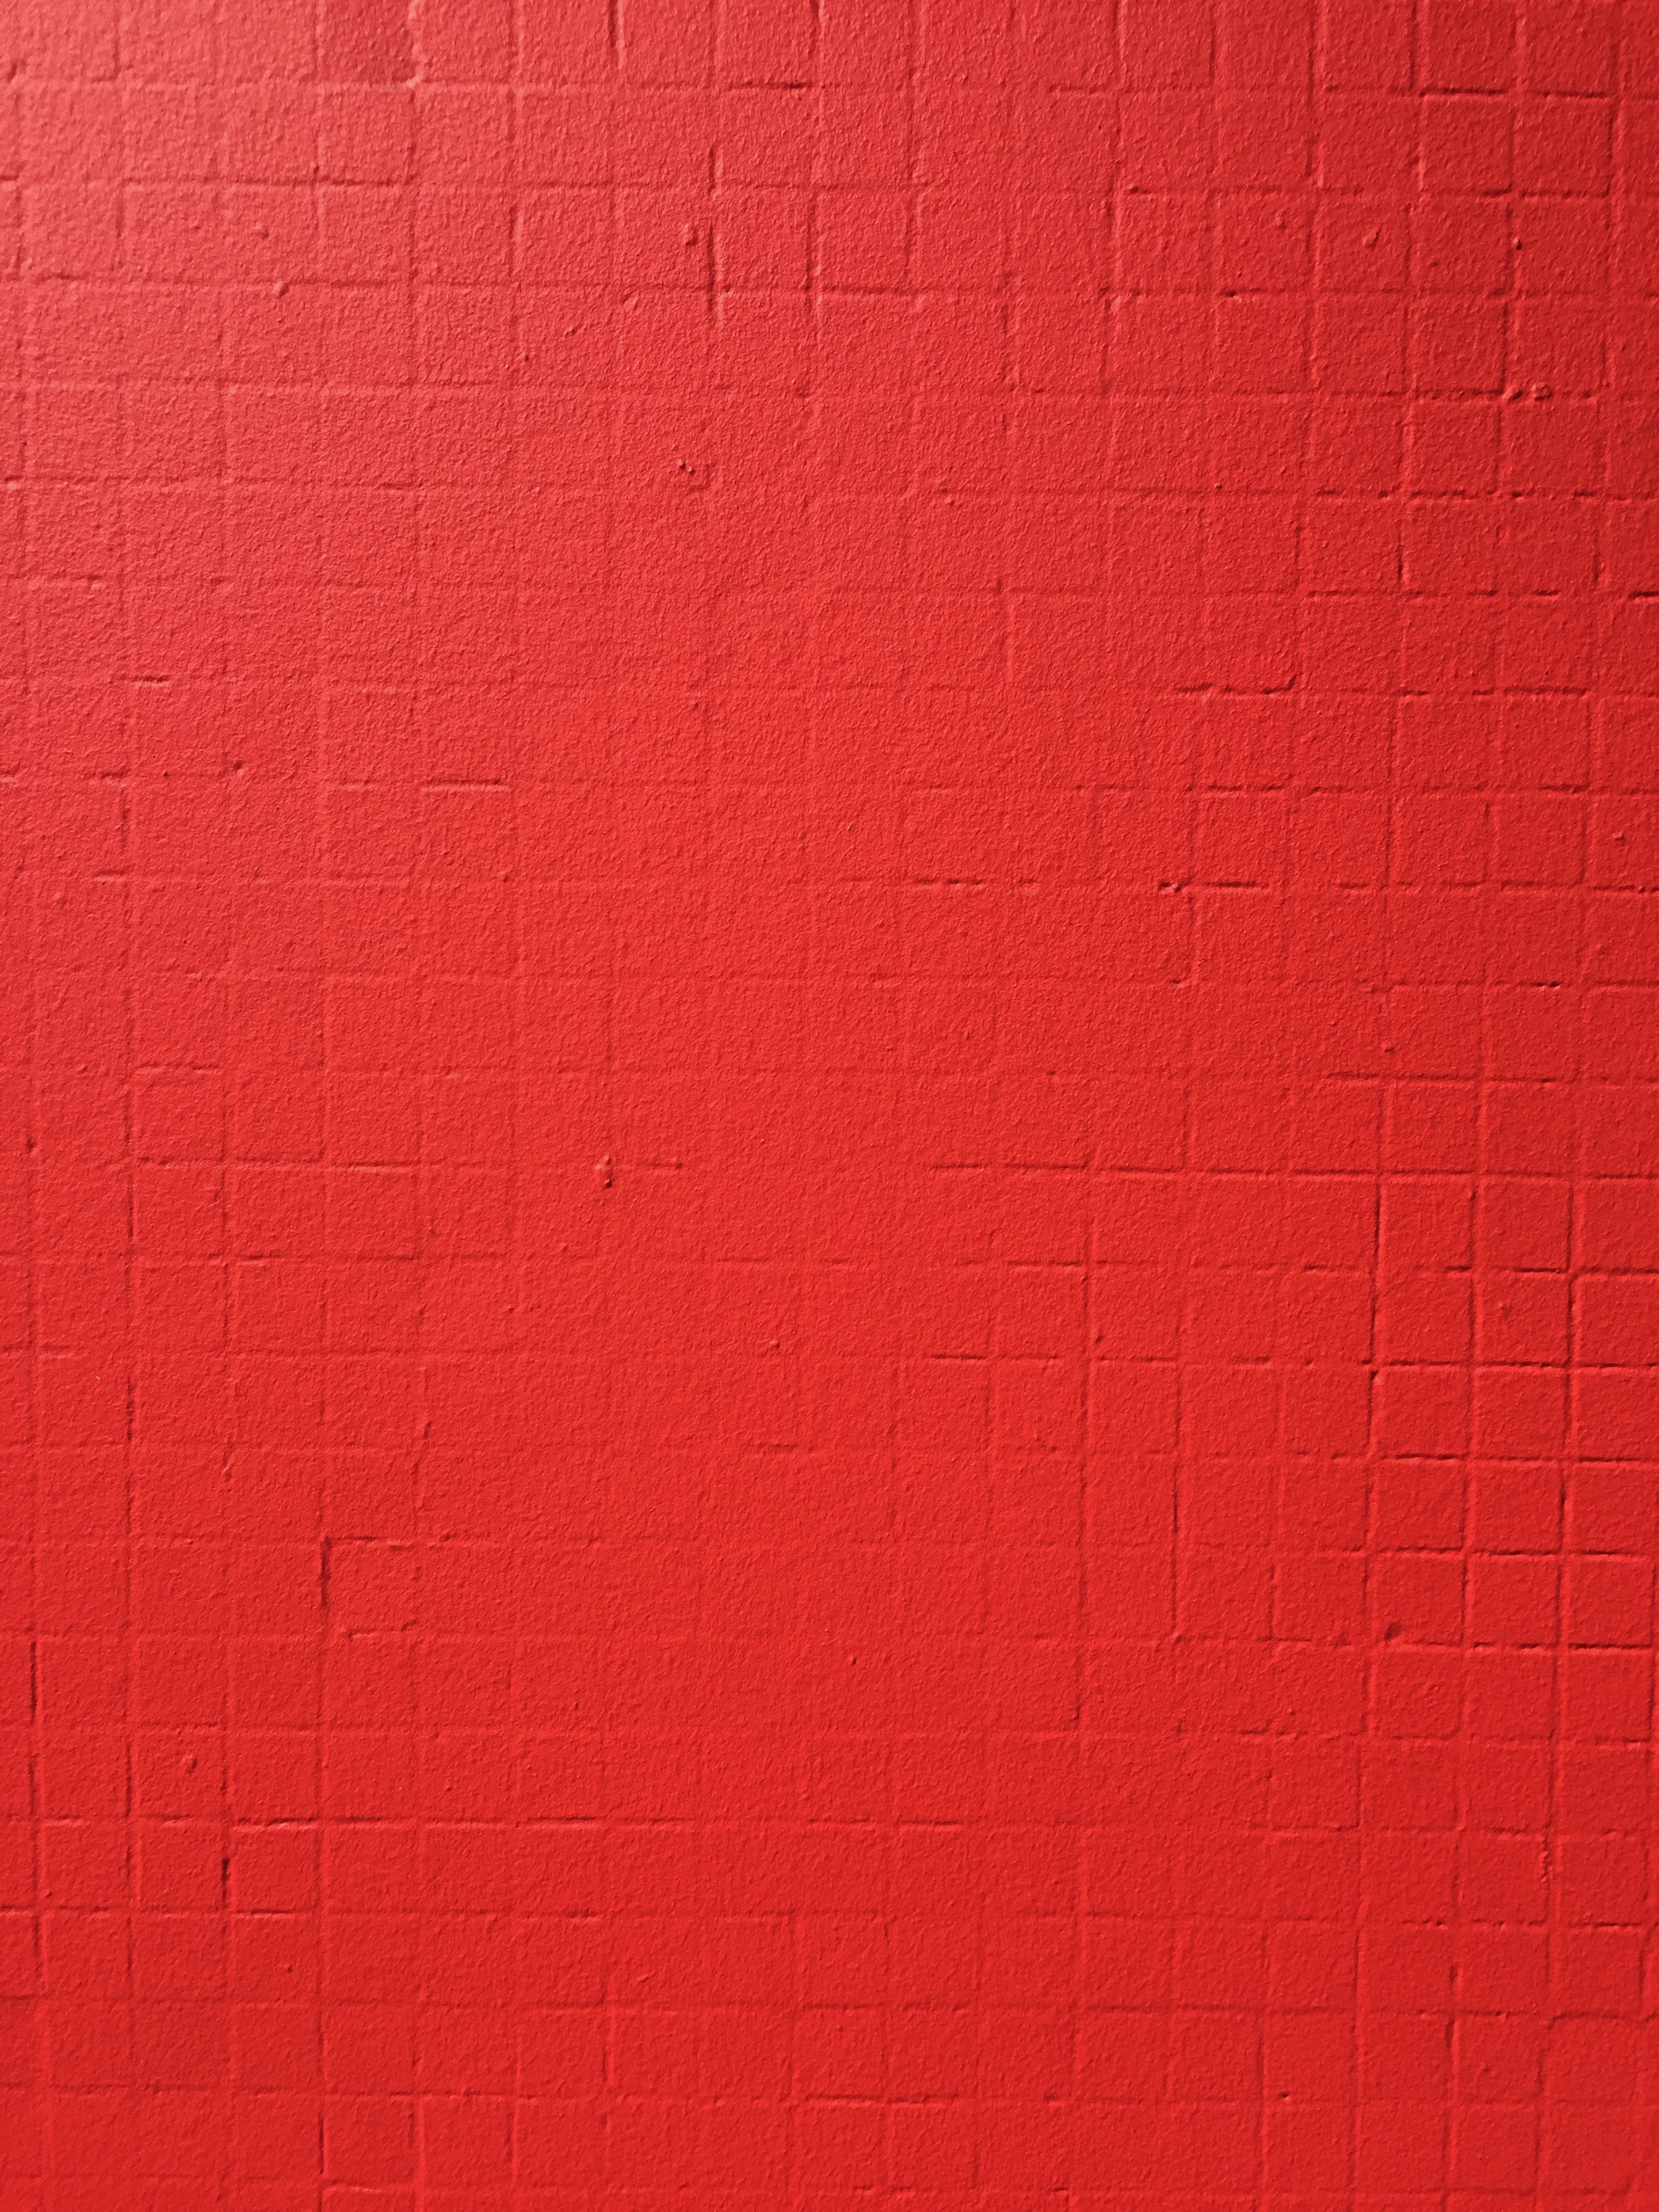 Very bright red paint on cement wall square grid | Free Textures